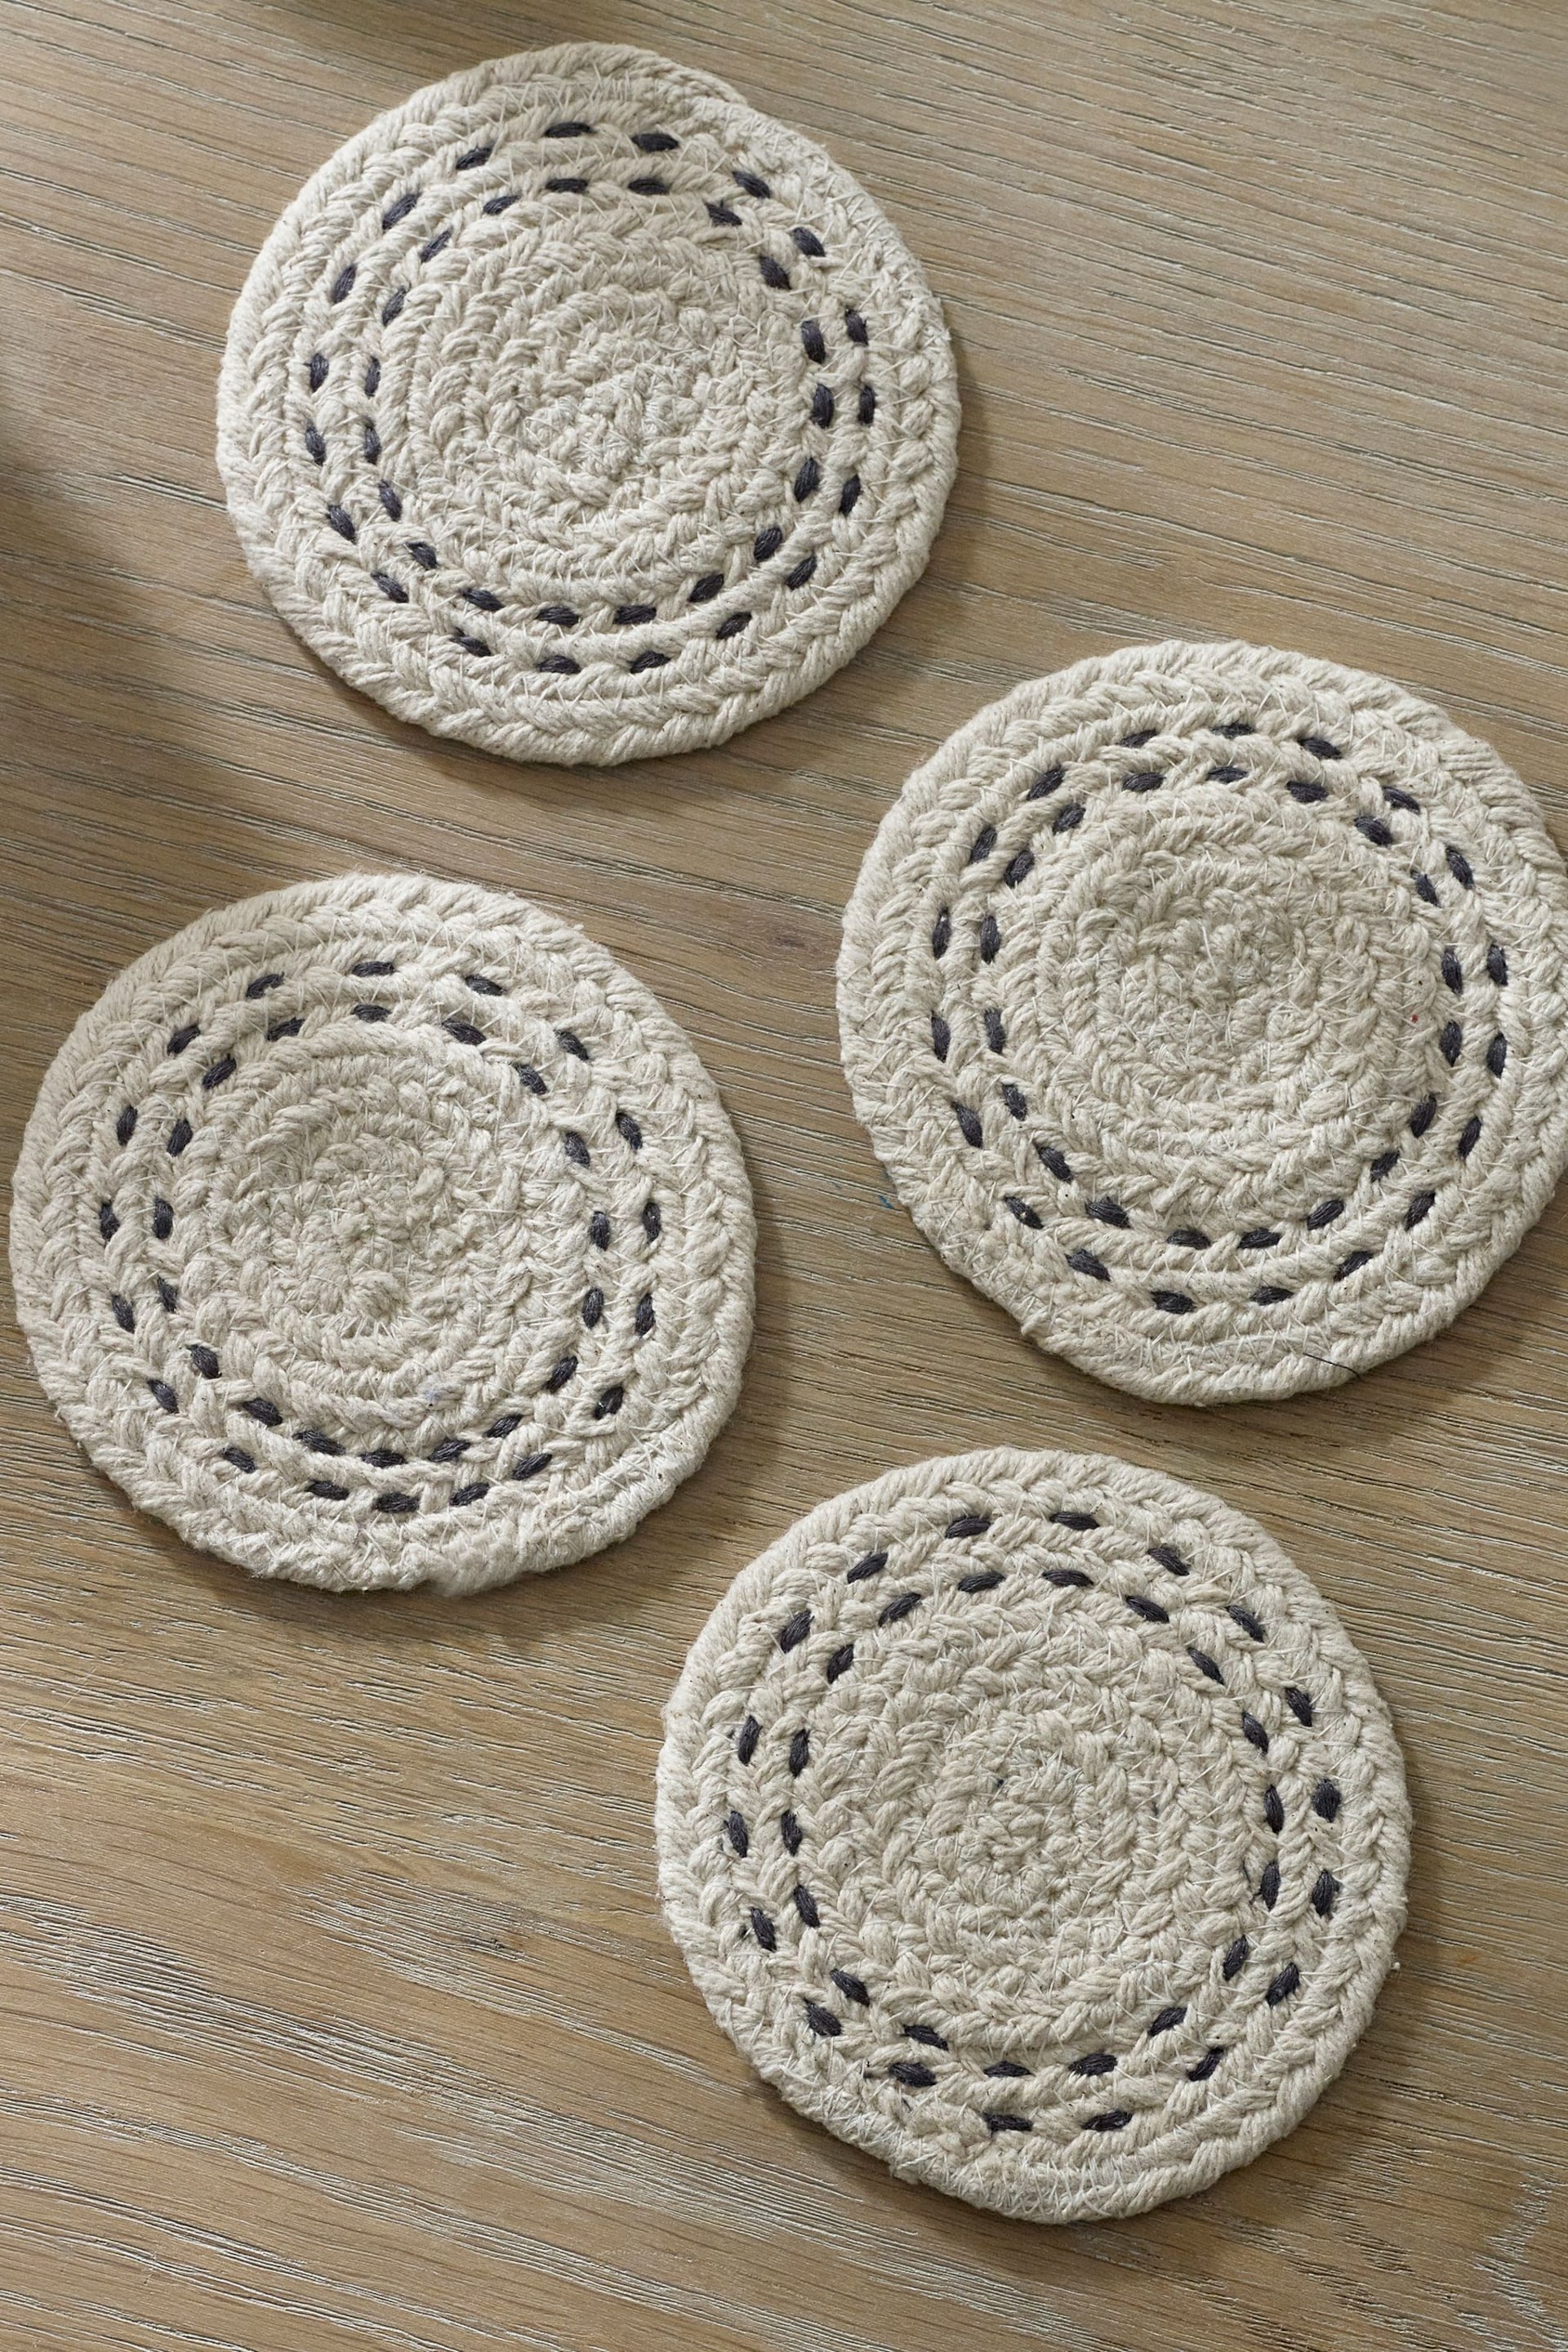 Set of 4 Natural Global Woven Fabric Coasters - Image 2 of 3